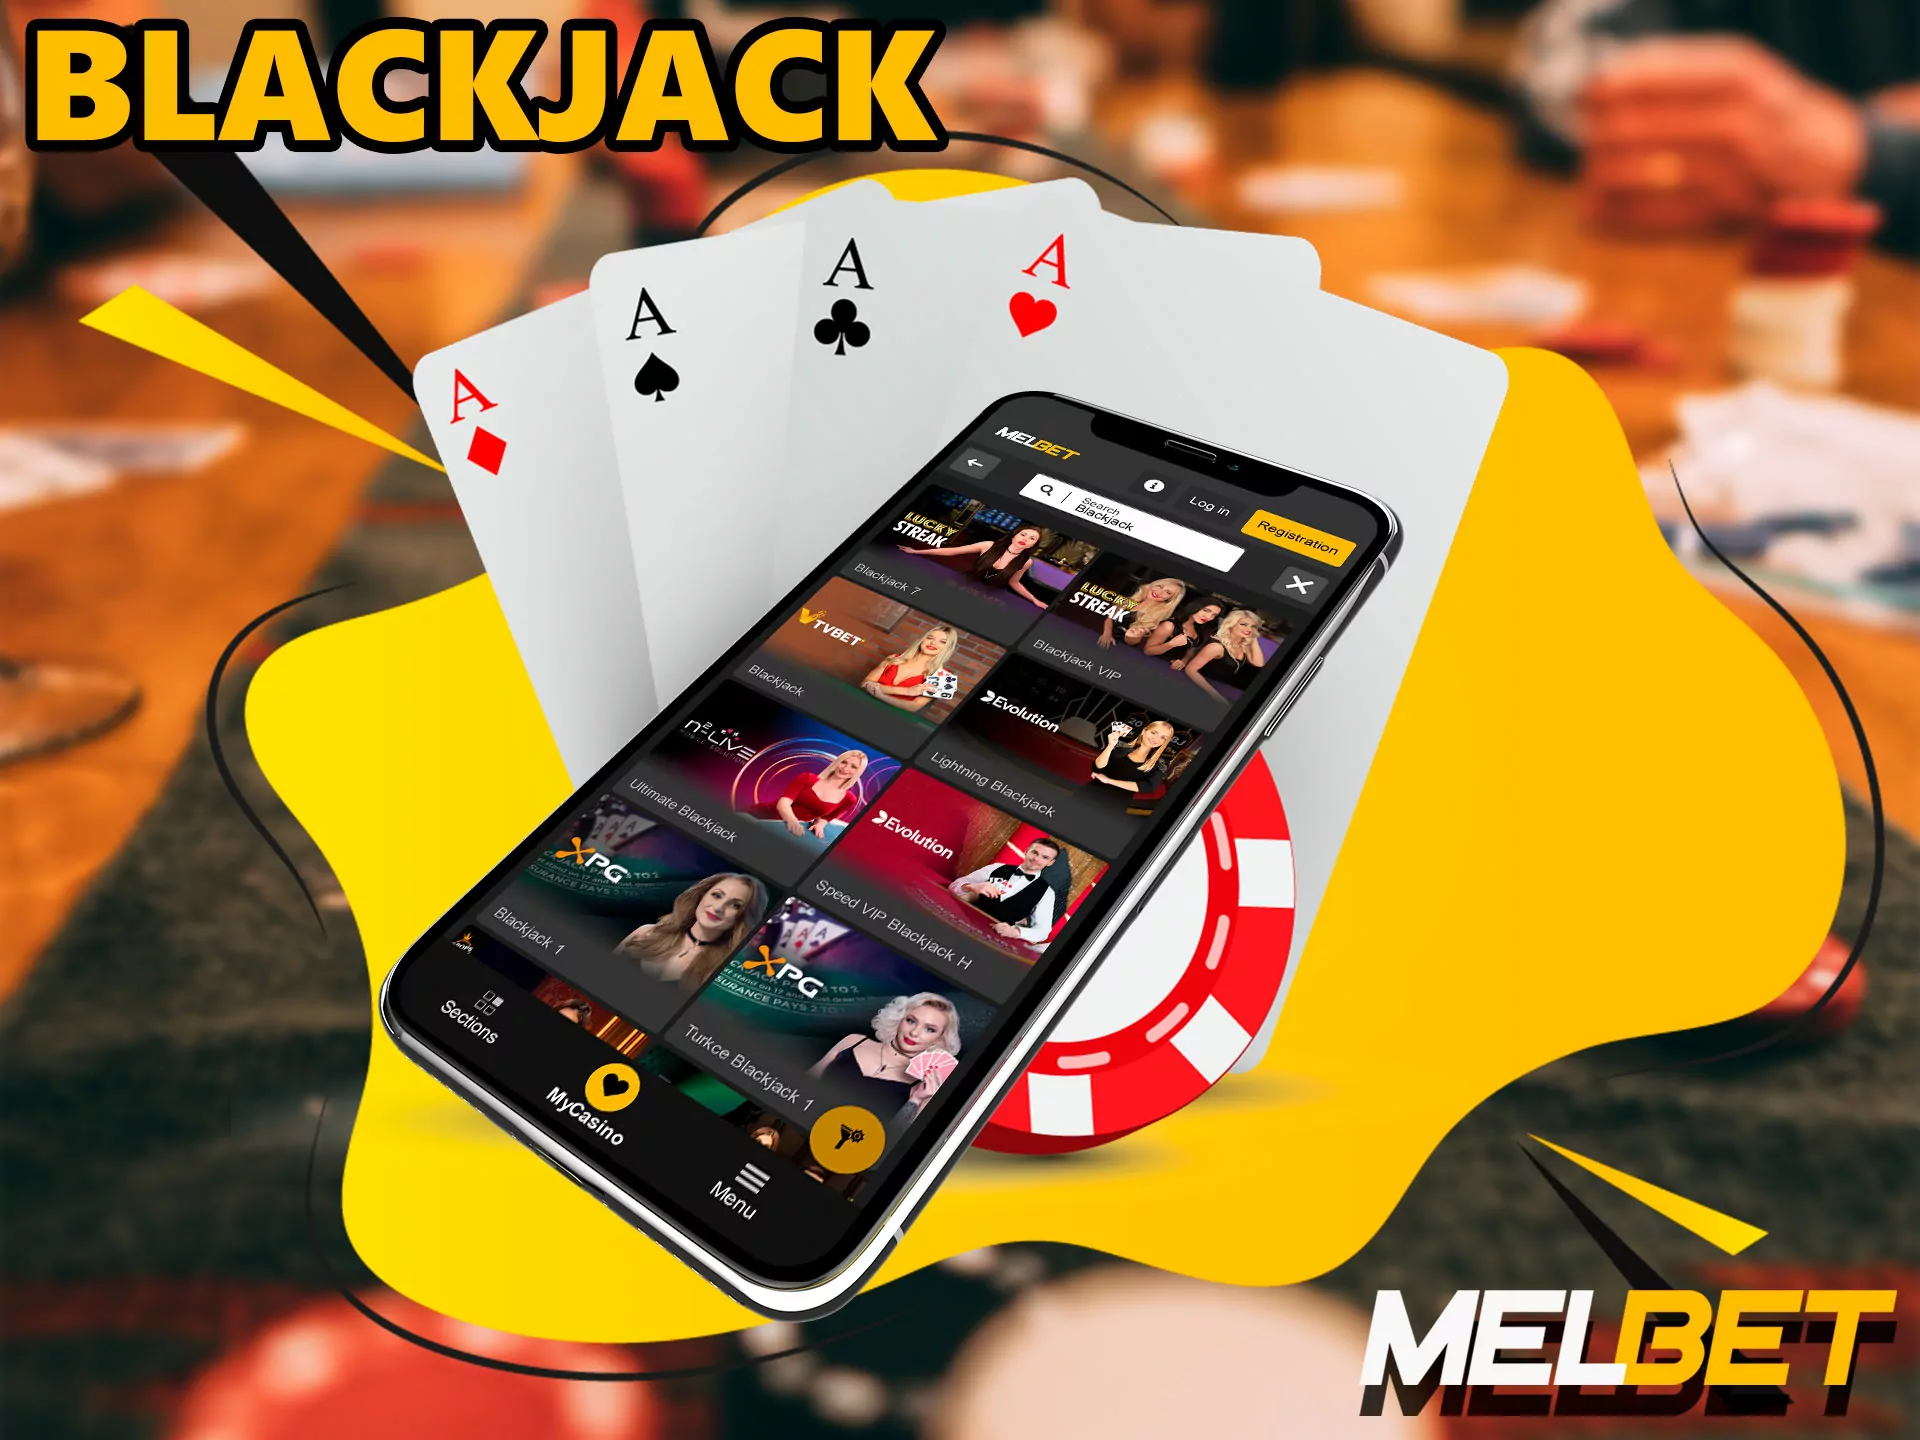 In Melbet online casino, the player has a certain number of cards in his hands, if the gambler is closest to a combination of cards equal to 21, then he wins.